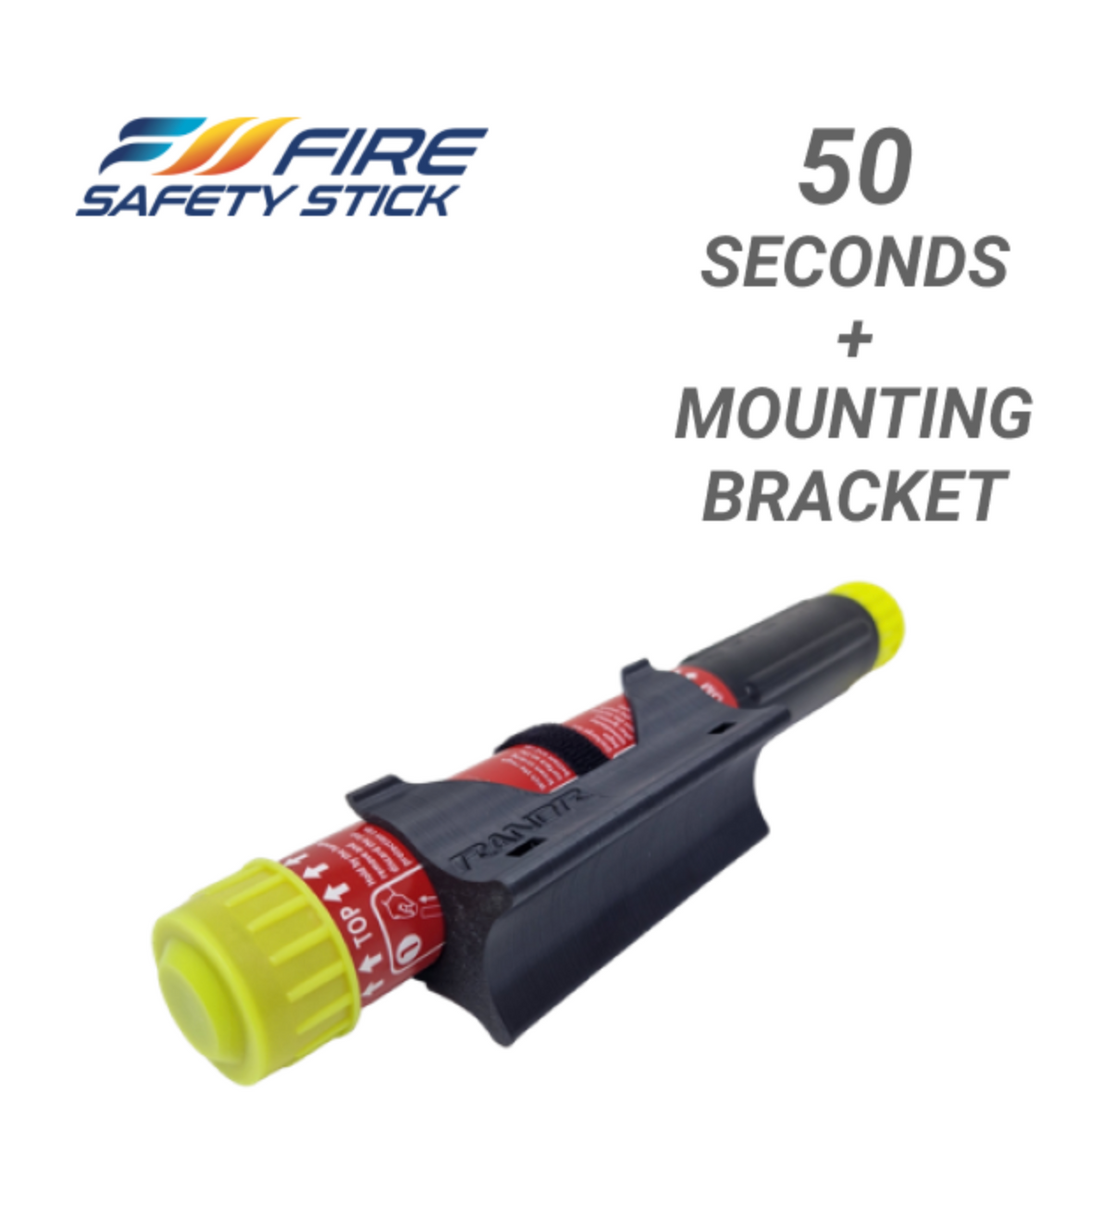 50 Second Fire Safety Stick and Mounting Bracket Offer